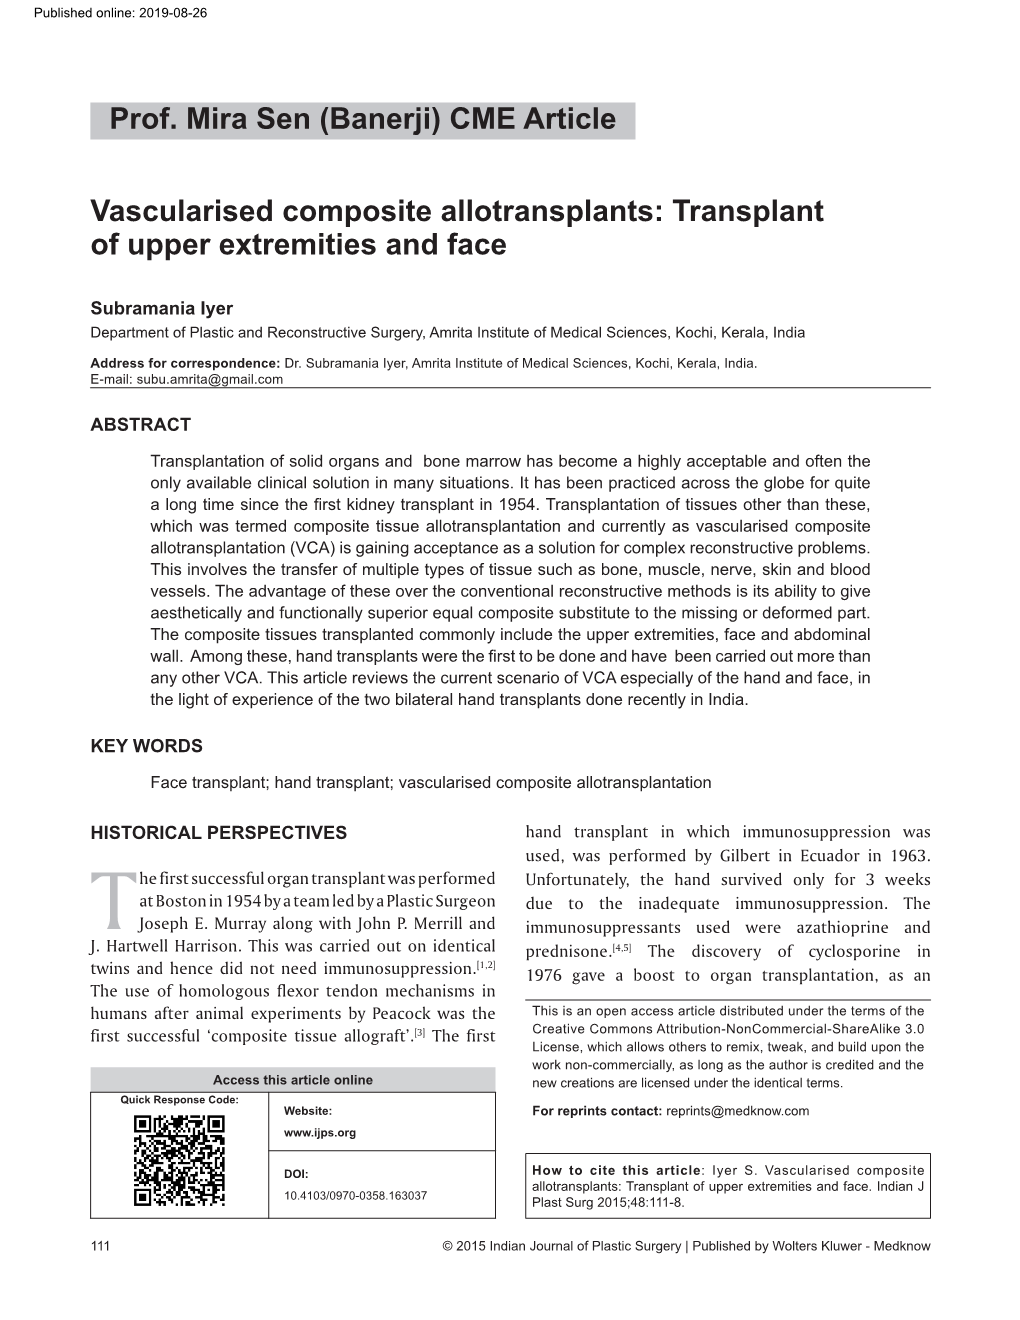 Vascularised Composite Allotransplants: Transplant of Upper Extremities and Face